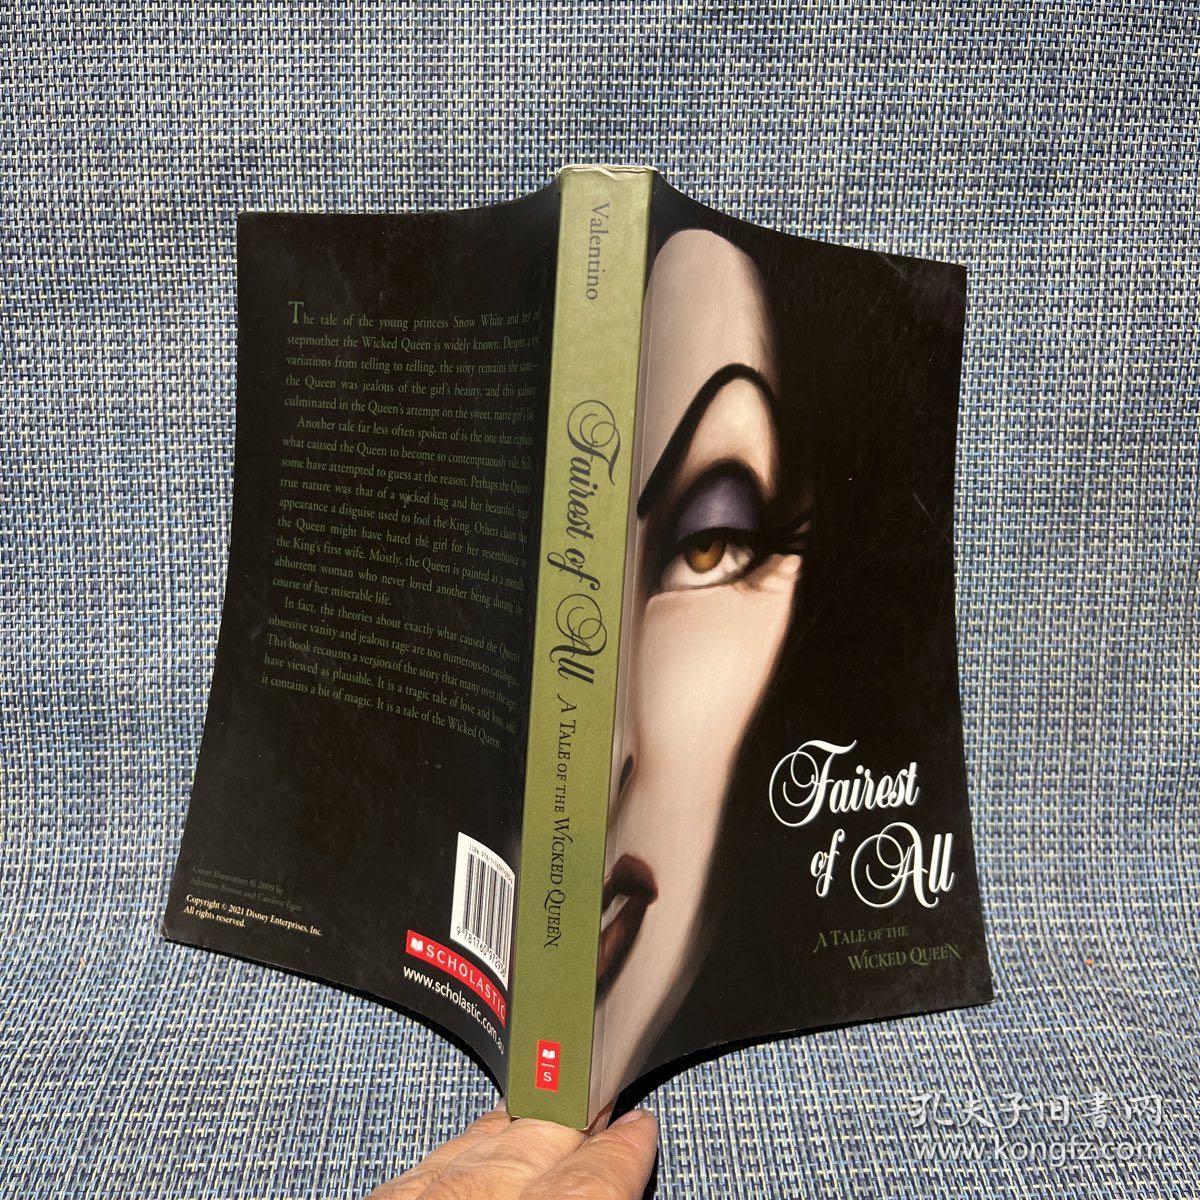 Fairest of All: A Tale of the Wicked Queen￼￼